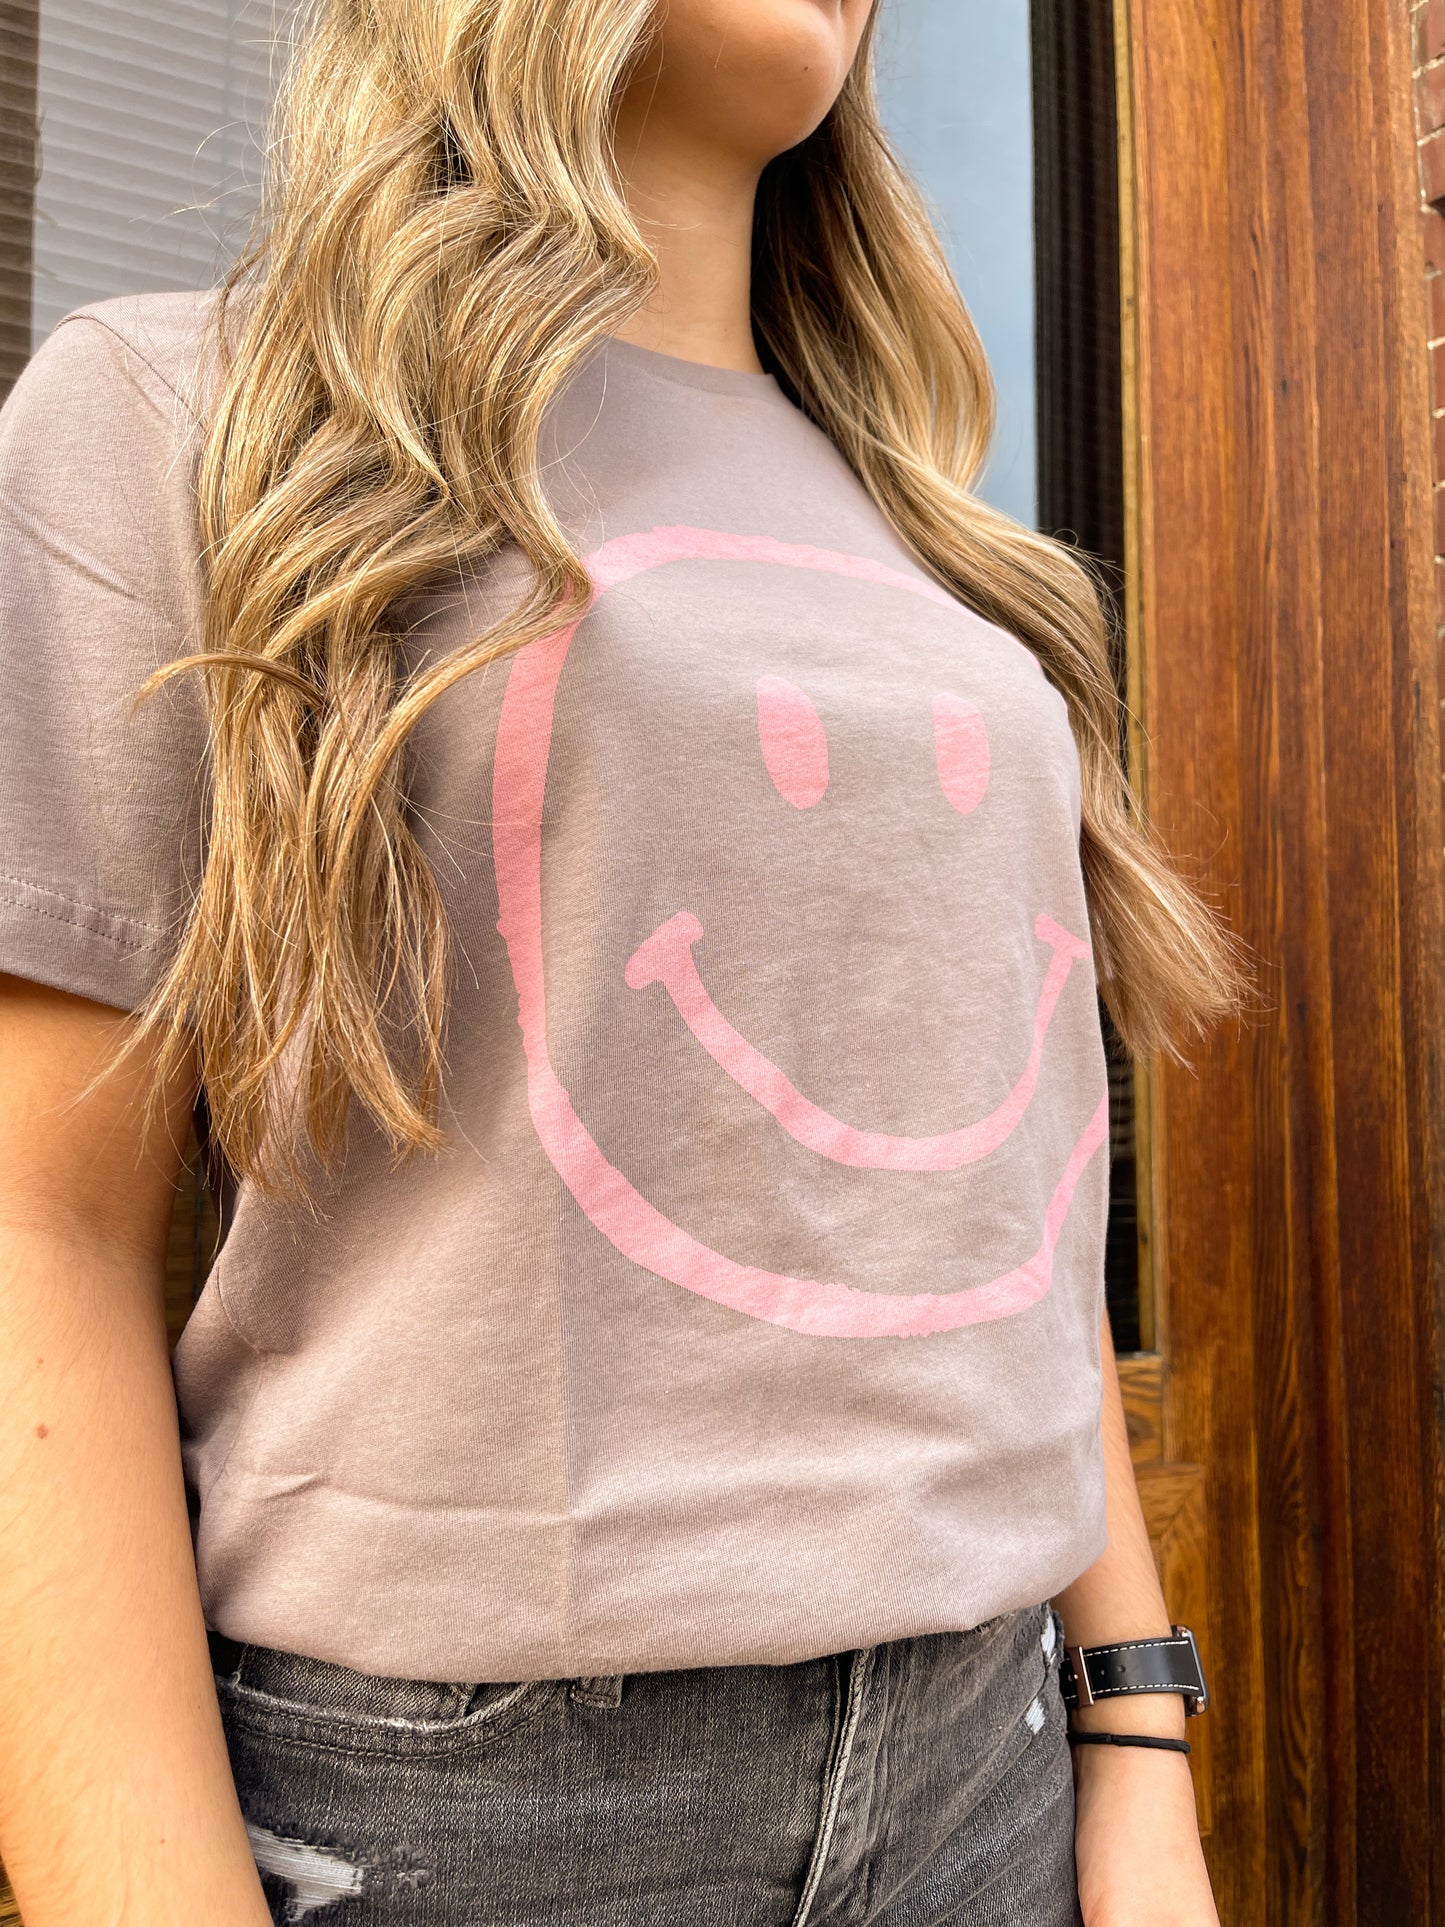 A Smile A Day Tee